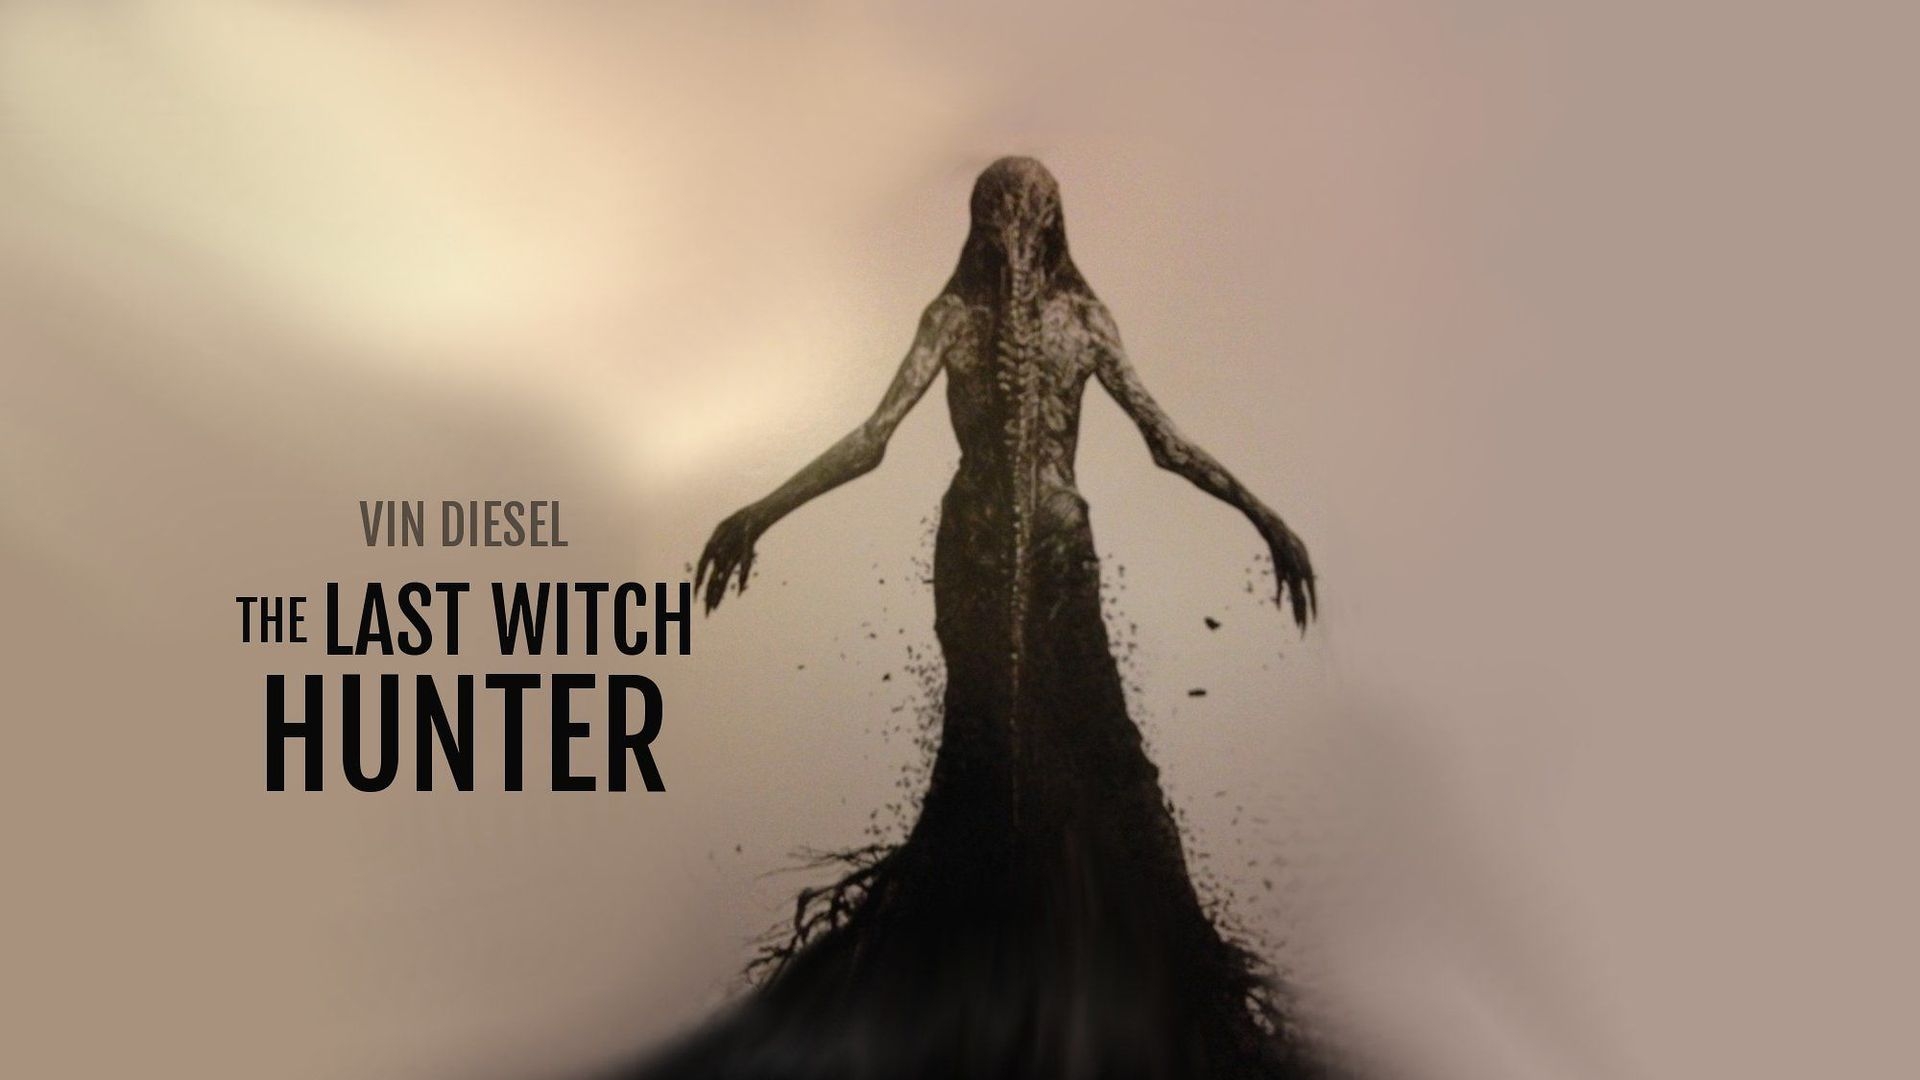 The Last Witch Hunter for 1920 x 1080 HDTV 1080p resolution